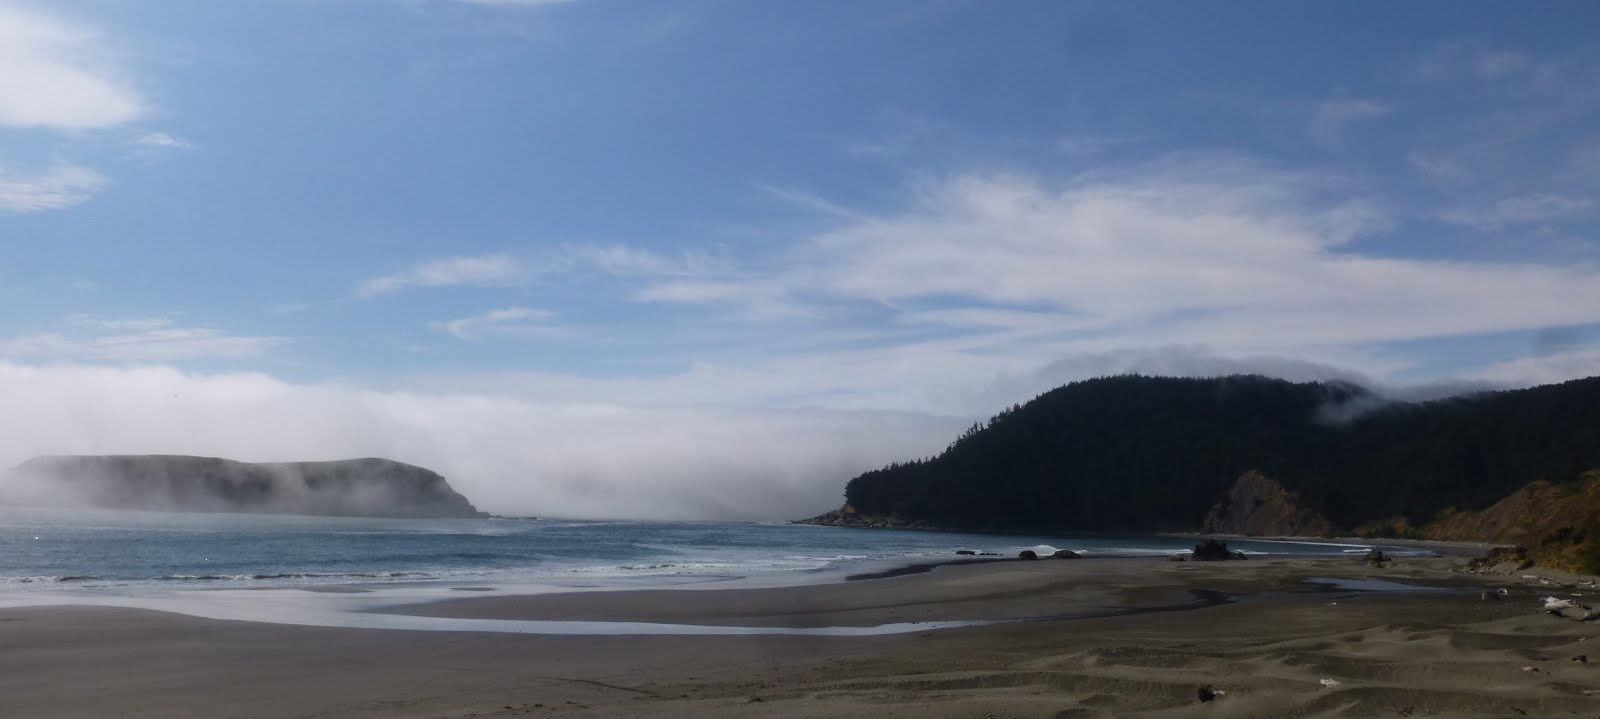 Revisiting the Oregon Coast - for the Umpteenth Time